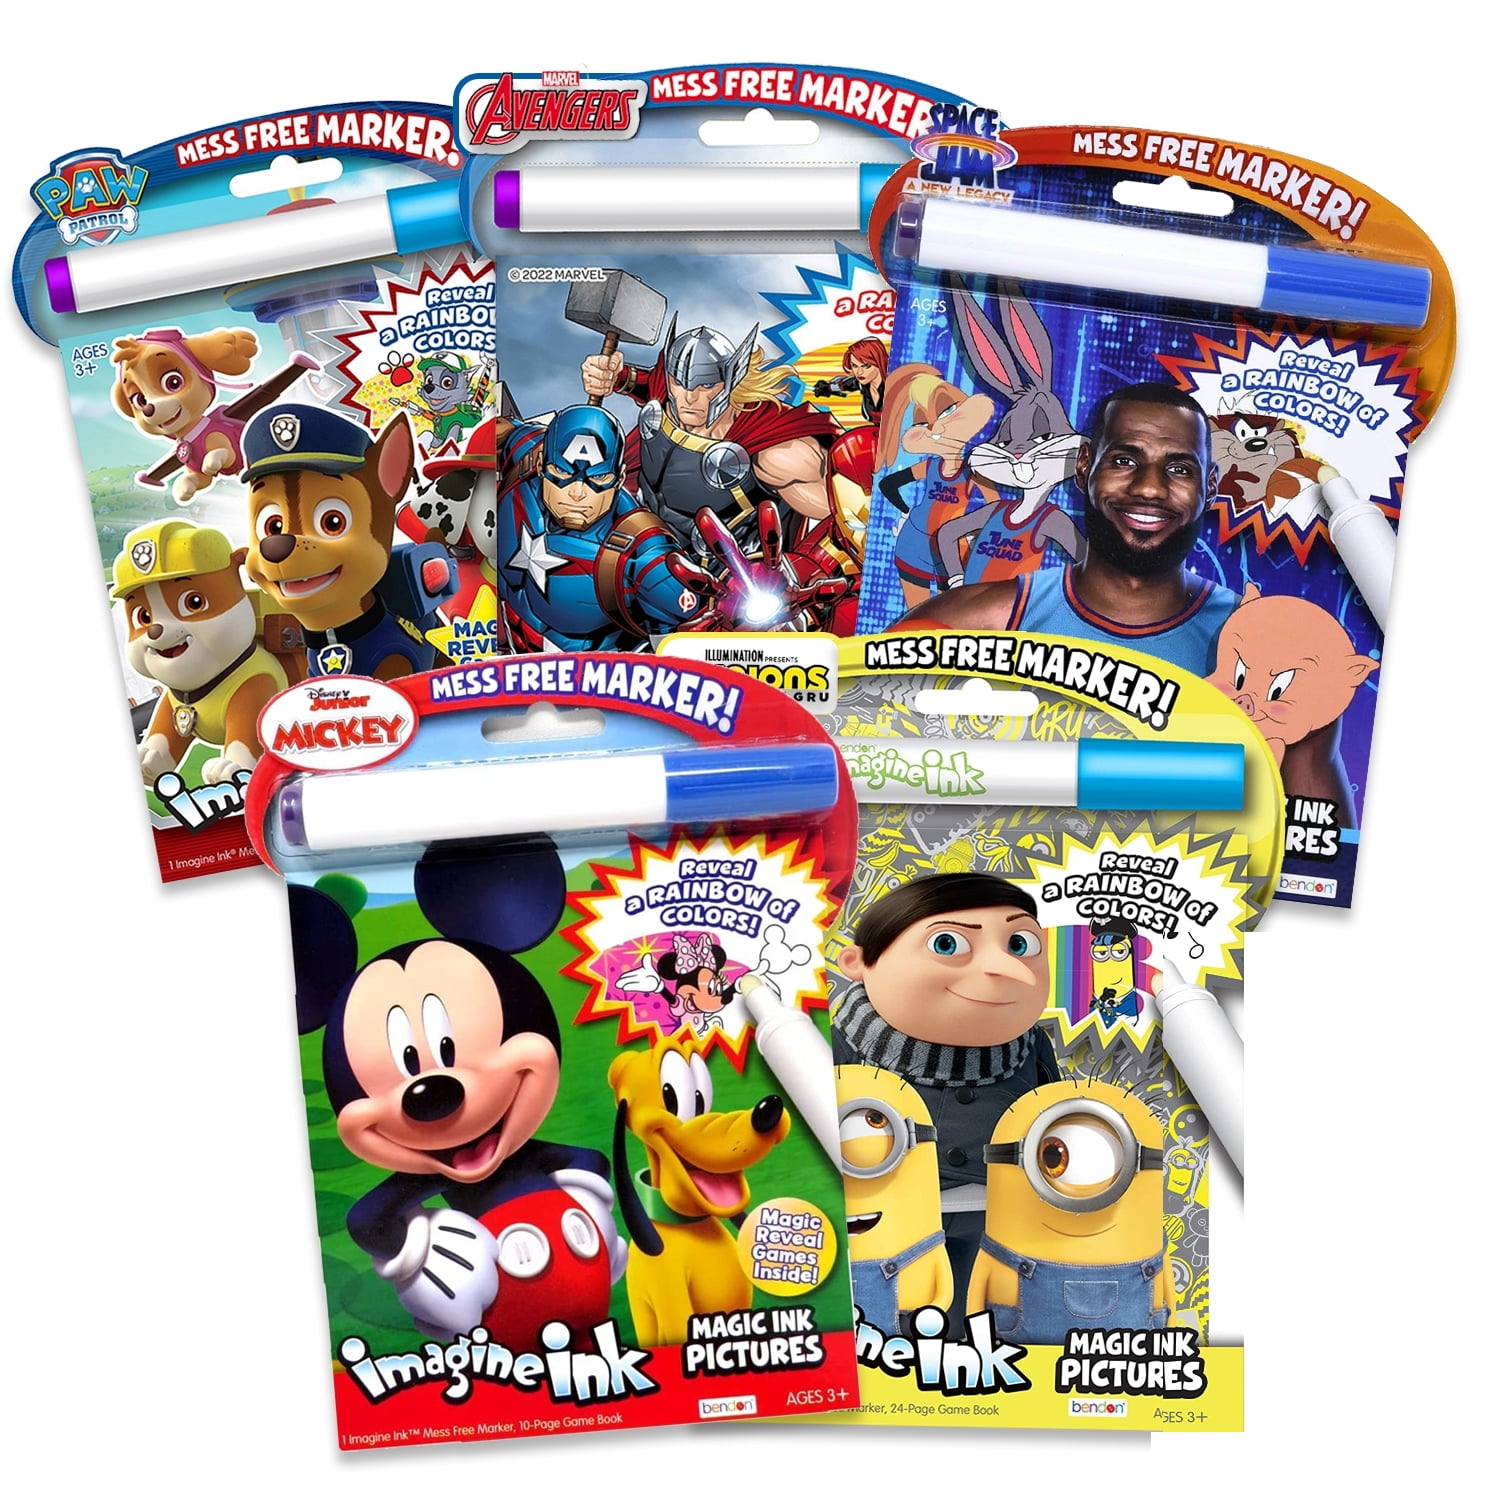 Disney Shop Paint with Water Books for Kids Bundle ~ 3 Mess-Free Imagine  Ink Water Painting Books with Water Surprise Brushes, Featuring Mickey  Mouse